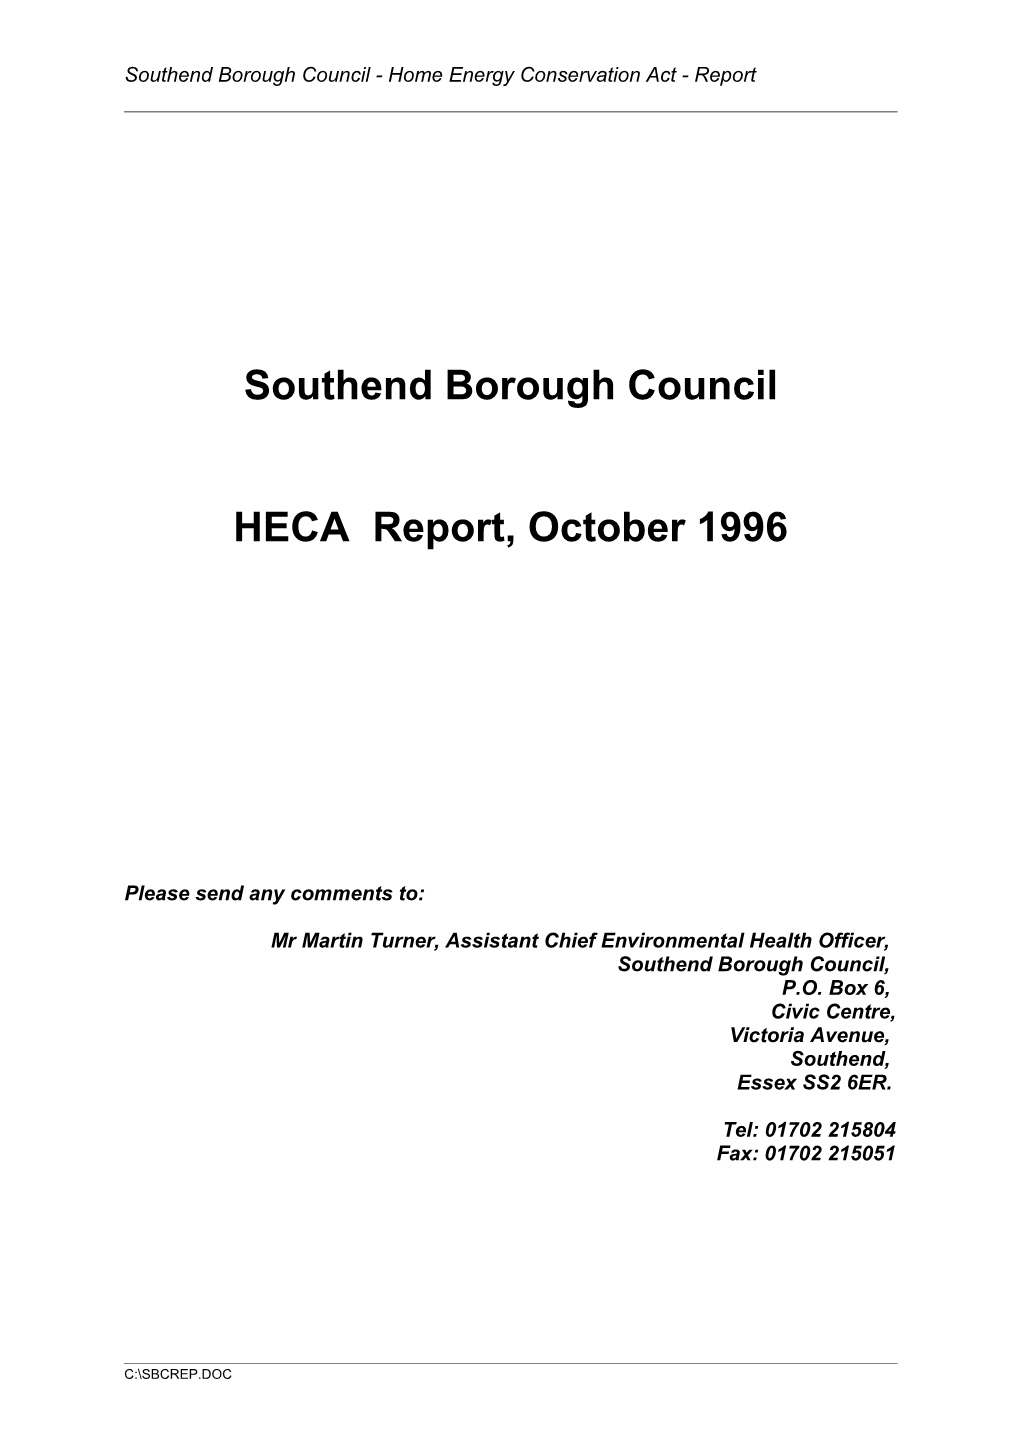 Southend Draft HECA Report